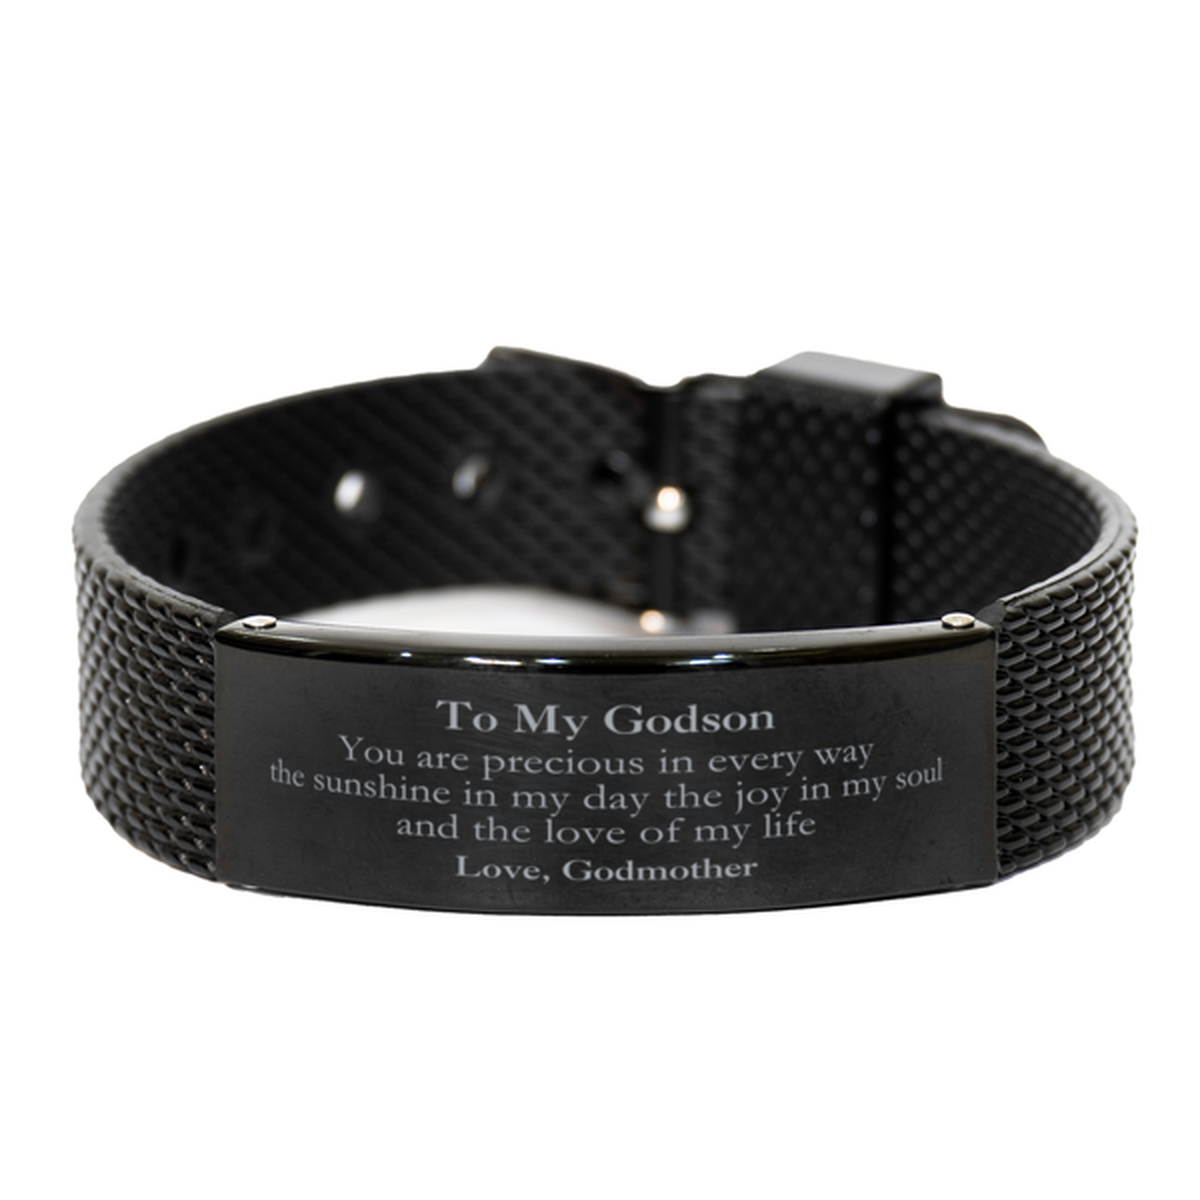 Graduation Gifts for Godson Black Shark Mesh Bracelet Present from Godmother, Christmas Godson Birthday Gifts Godson You are precious in every way the sunshine in my day. Love, Godmother